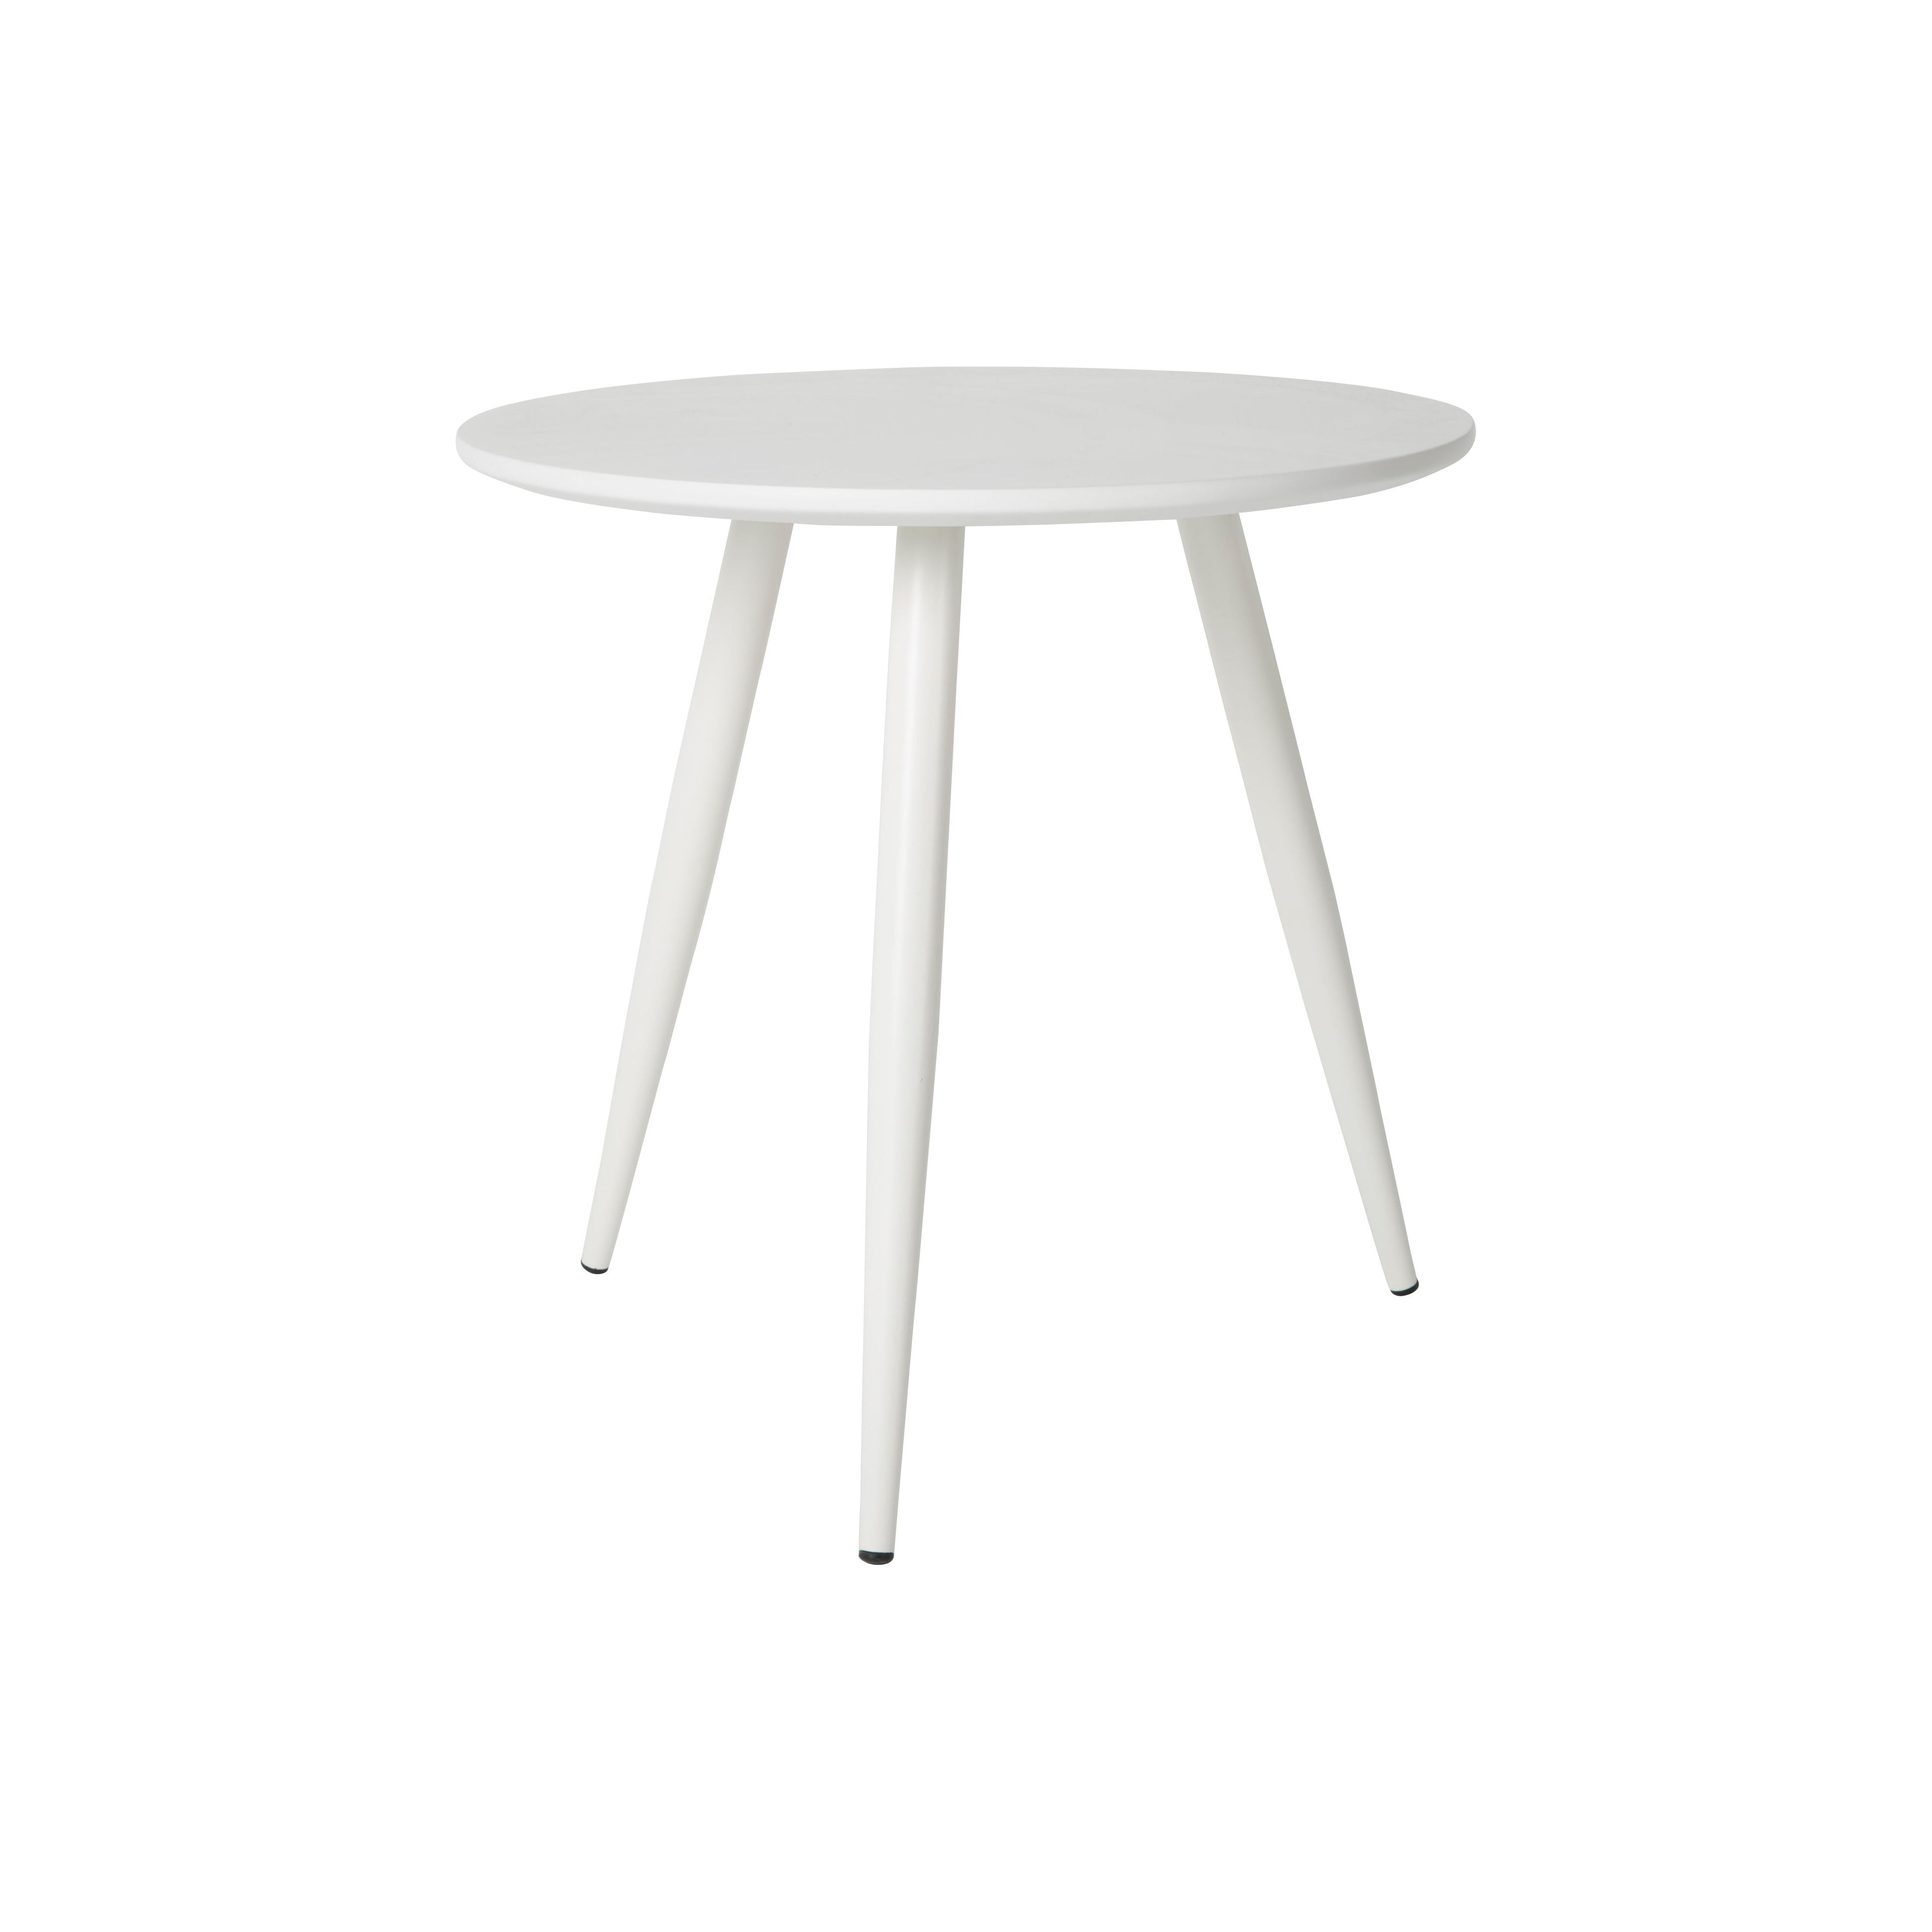 Side table daven white set of 2